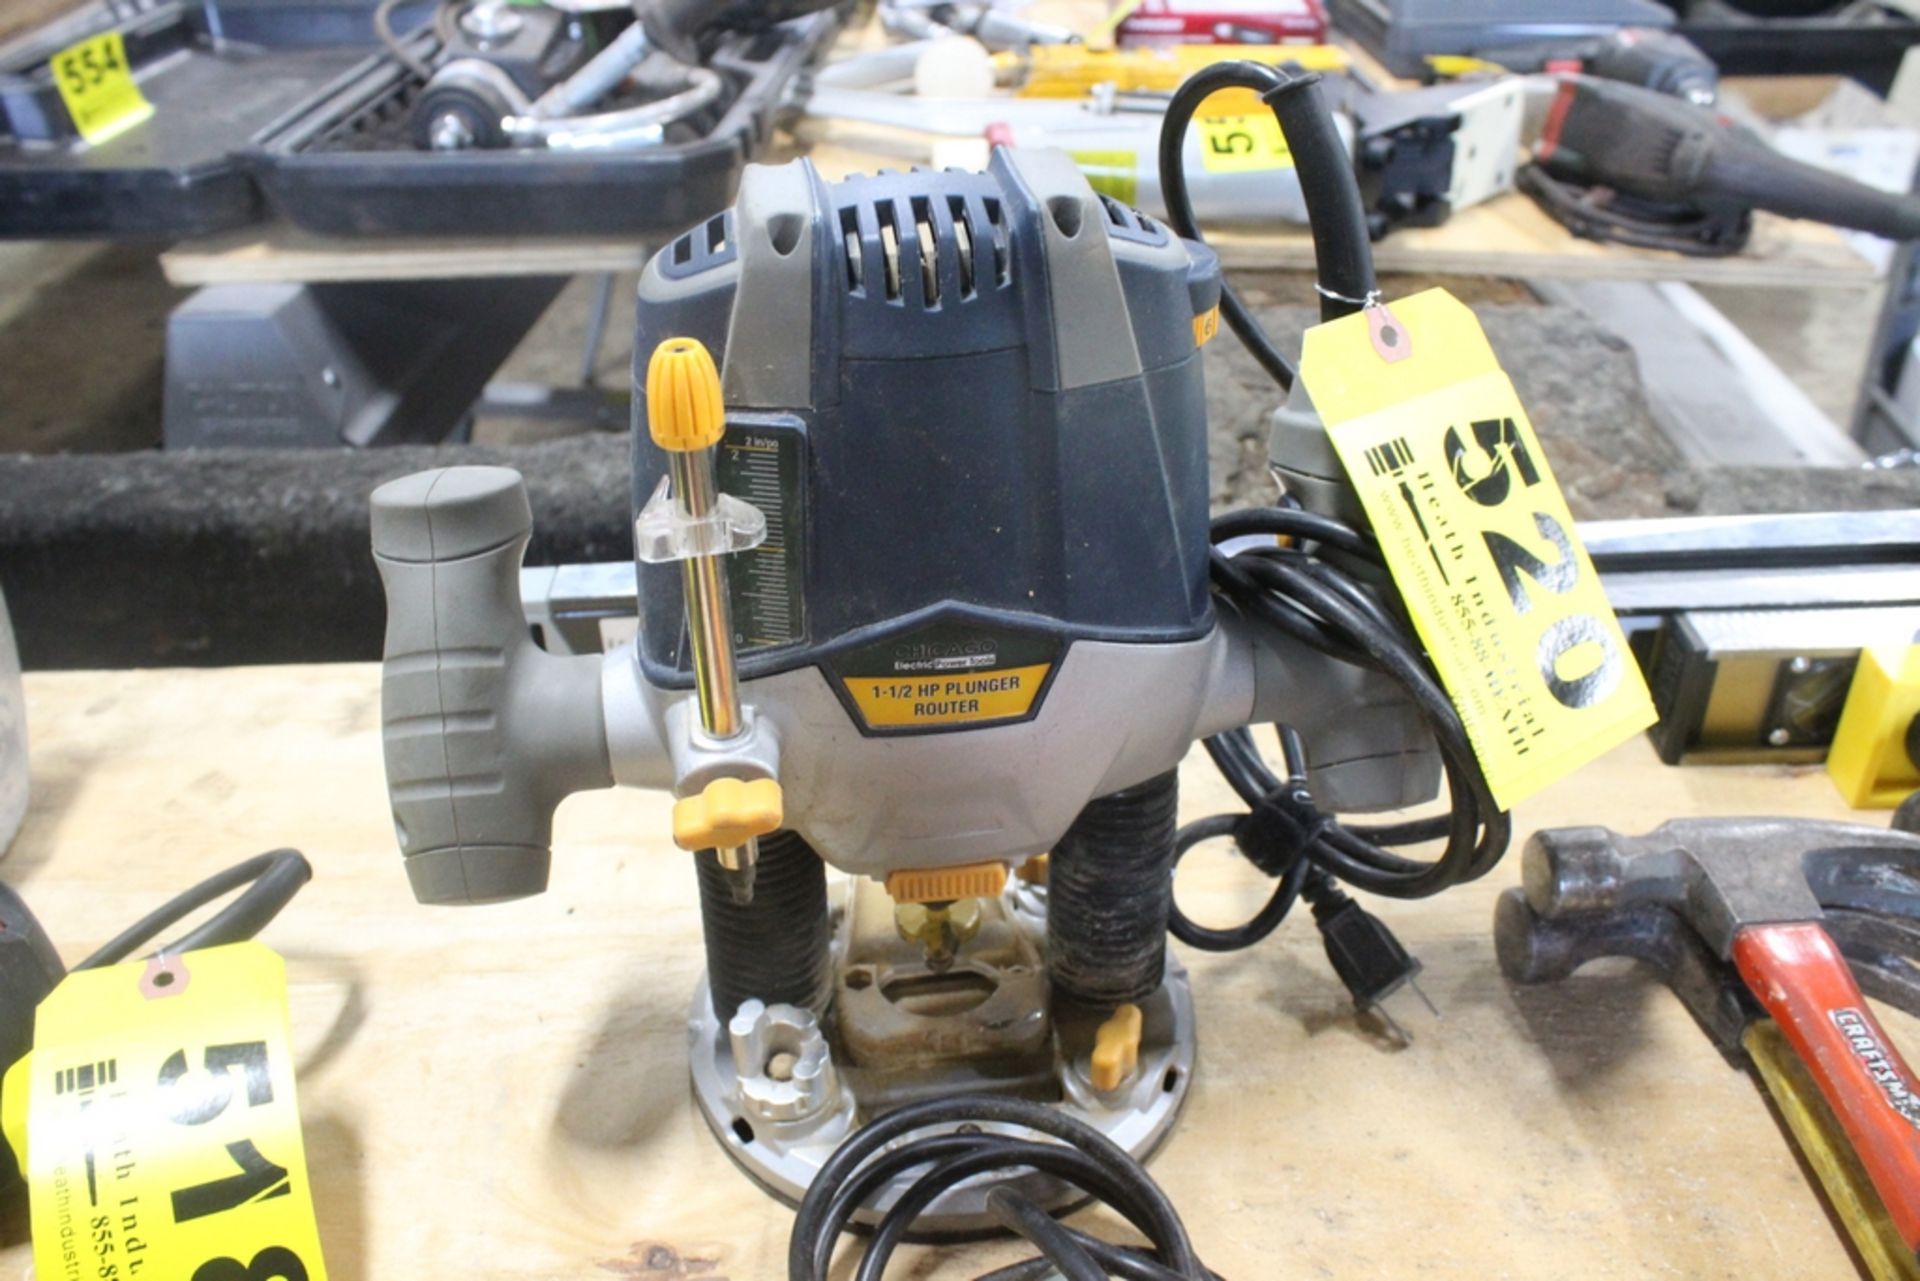 CHICAGO 1-1/2 HP PLUNGE ROUTER